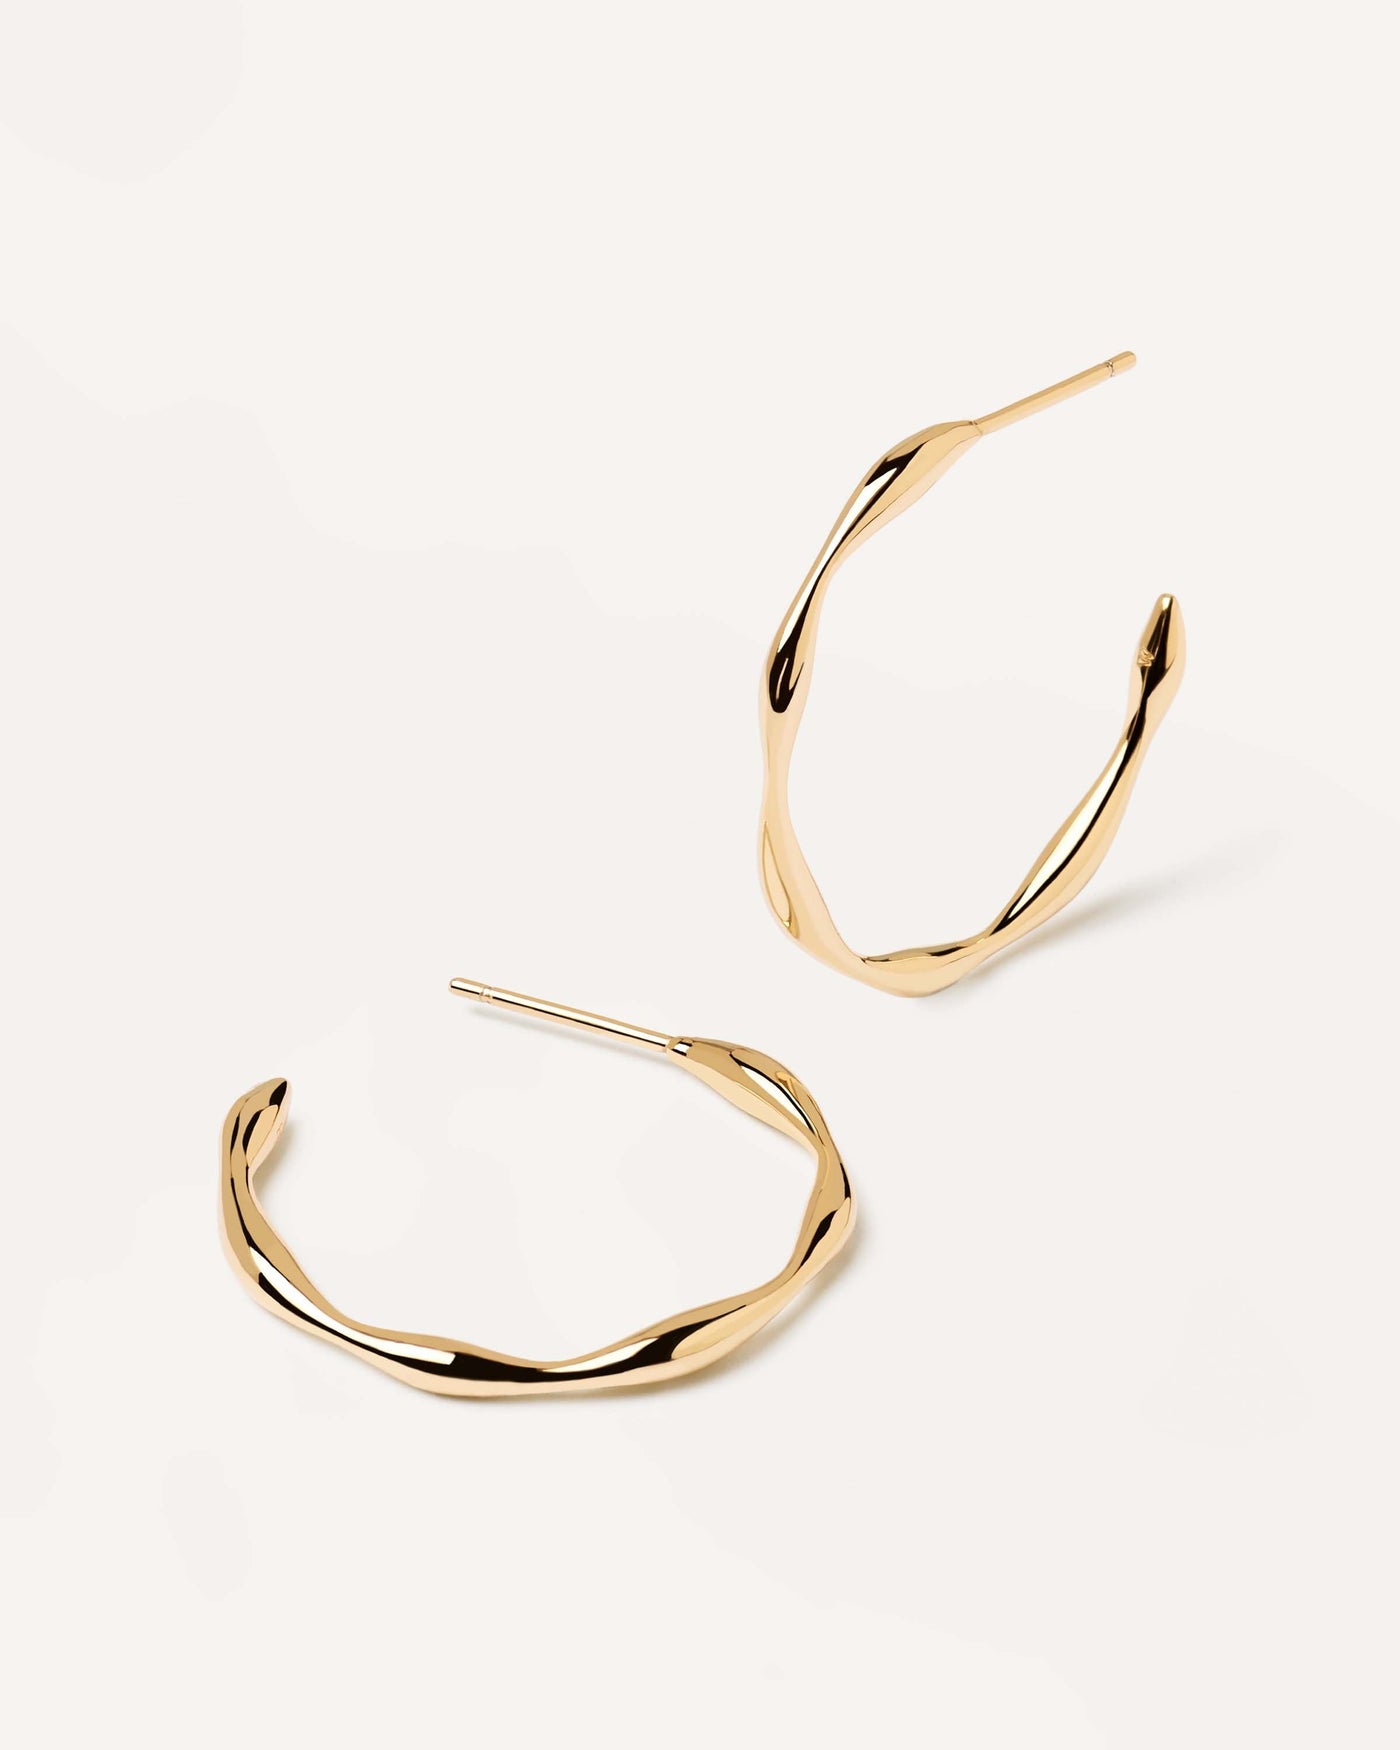 2023 Selection | Vanilla Earrings. Wavy hoop earrings in gold-plated silver. Get the latest arrival from PDPAOLA. Place your order safely and get this Best Seller. Free Shipping.